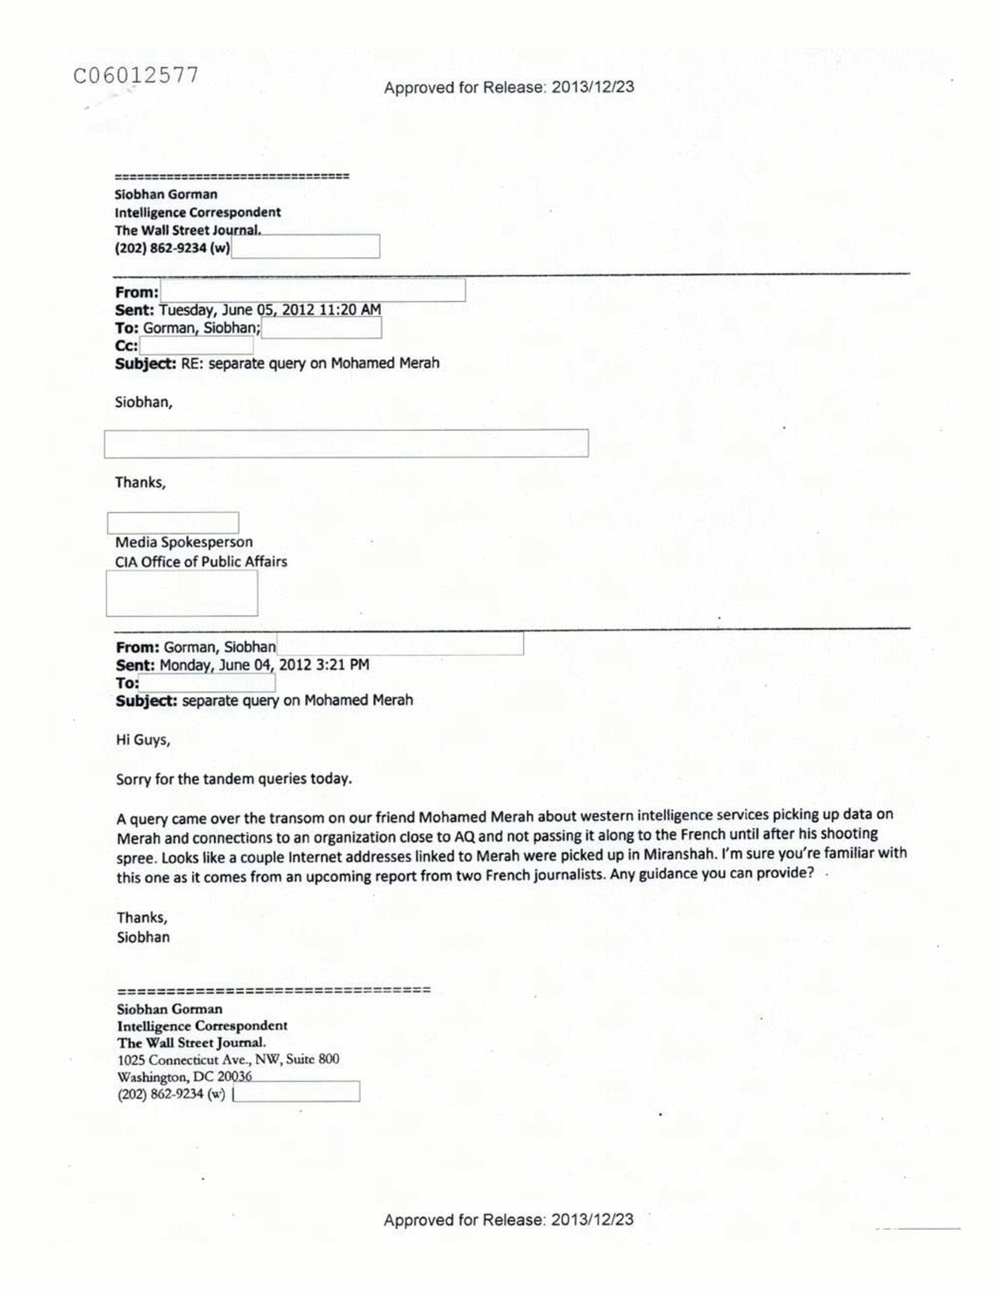 Page 113 from Email Correspondence Between Reporters and CIA Flacks